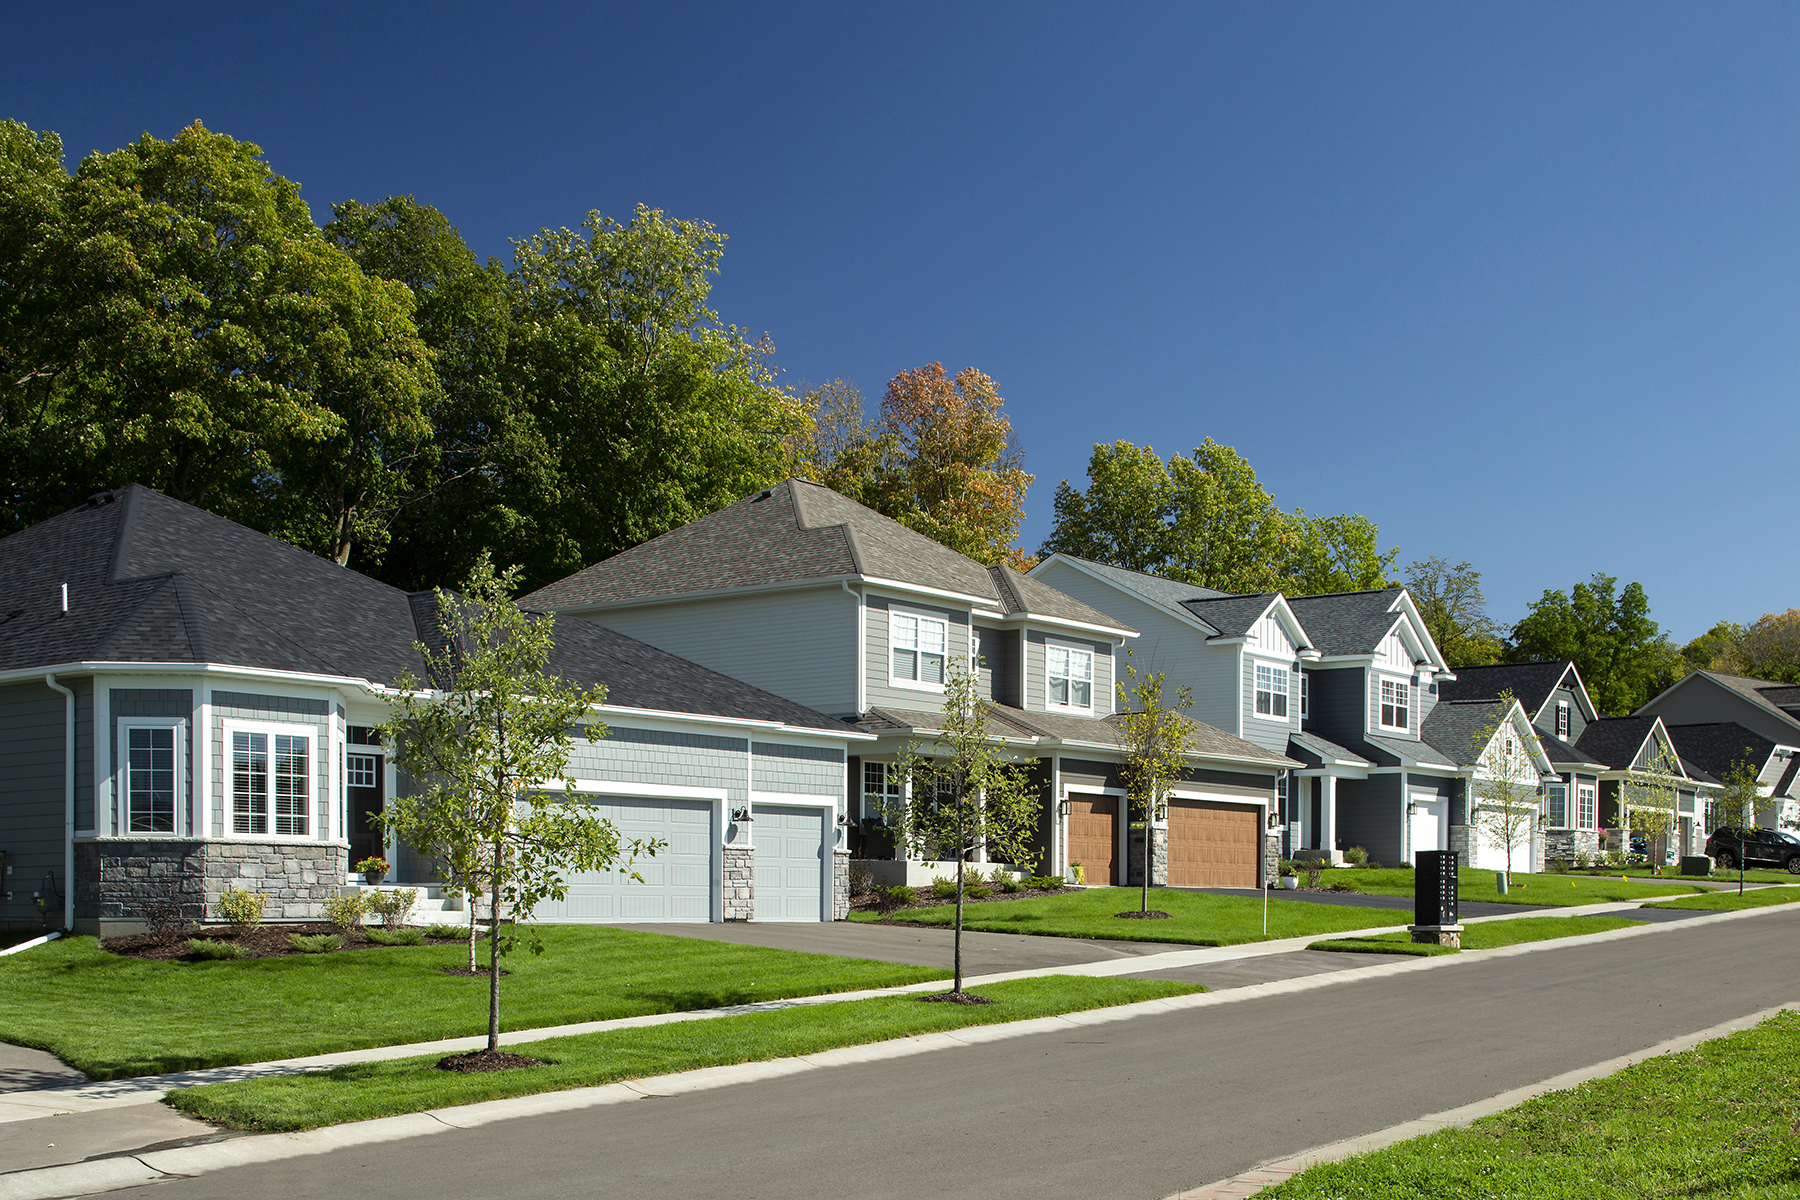 Streetscape of Homes With Trees Behind